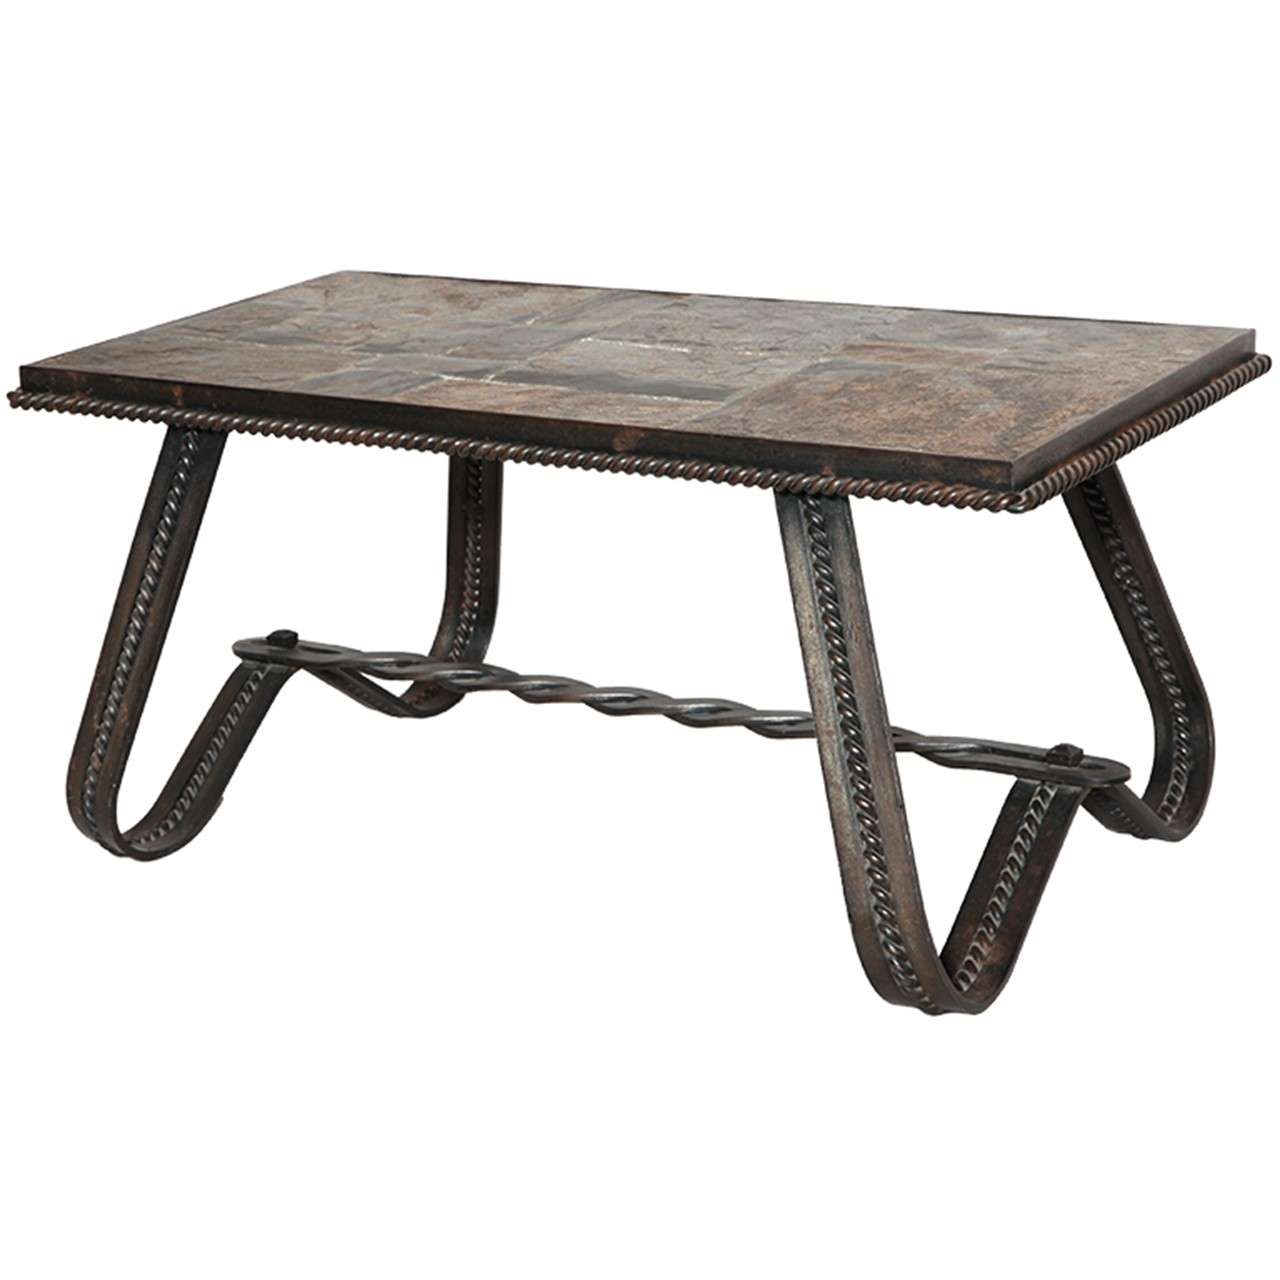 French Art Deco Wrought-Iron and Slate Coffee Table For Sale